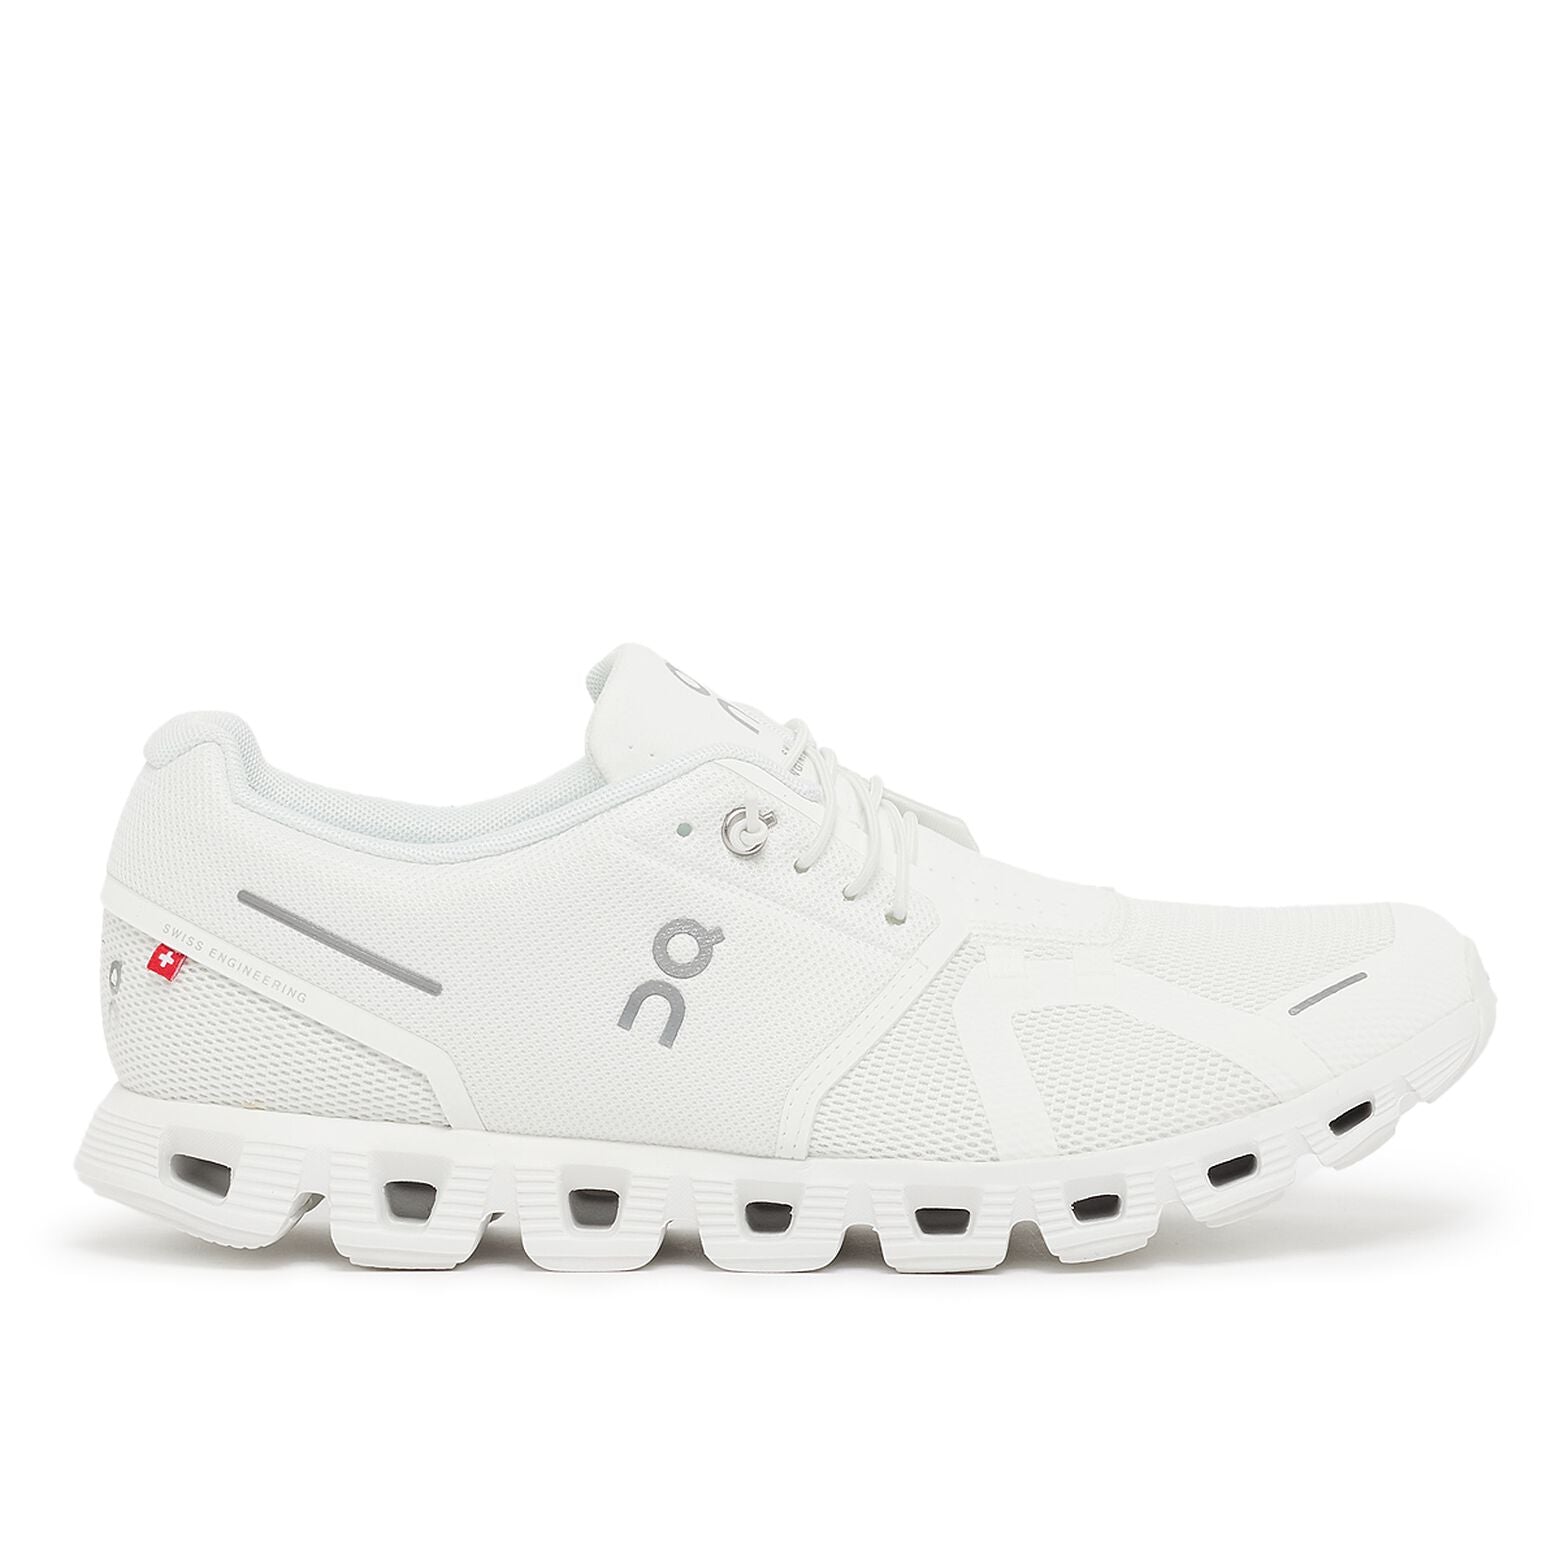 Lateral view of the Men's ON Cloud 5 in the color Undyed White/White